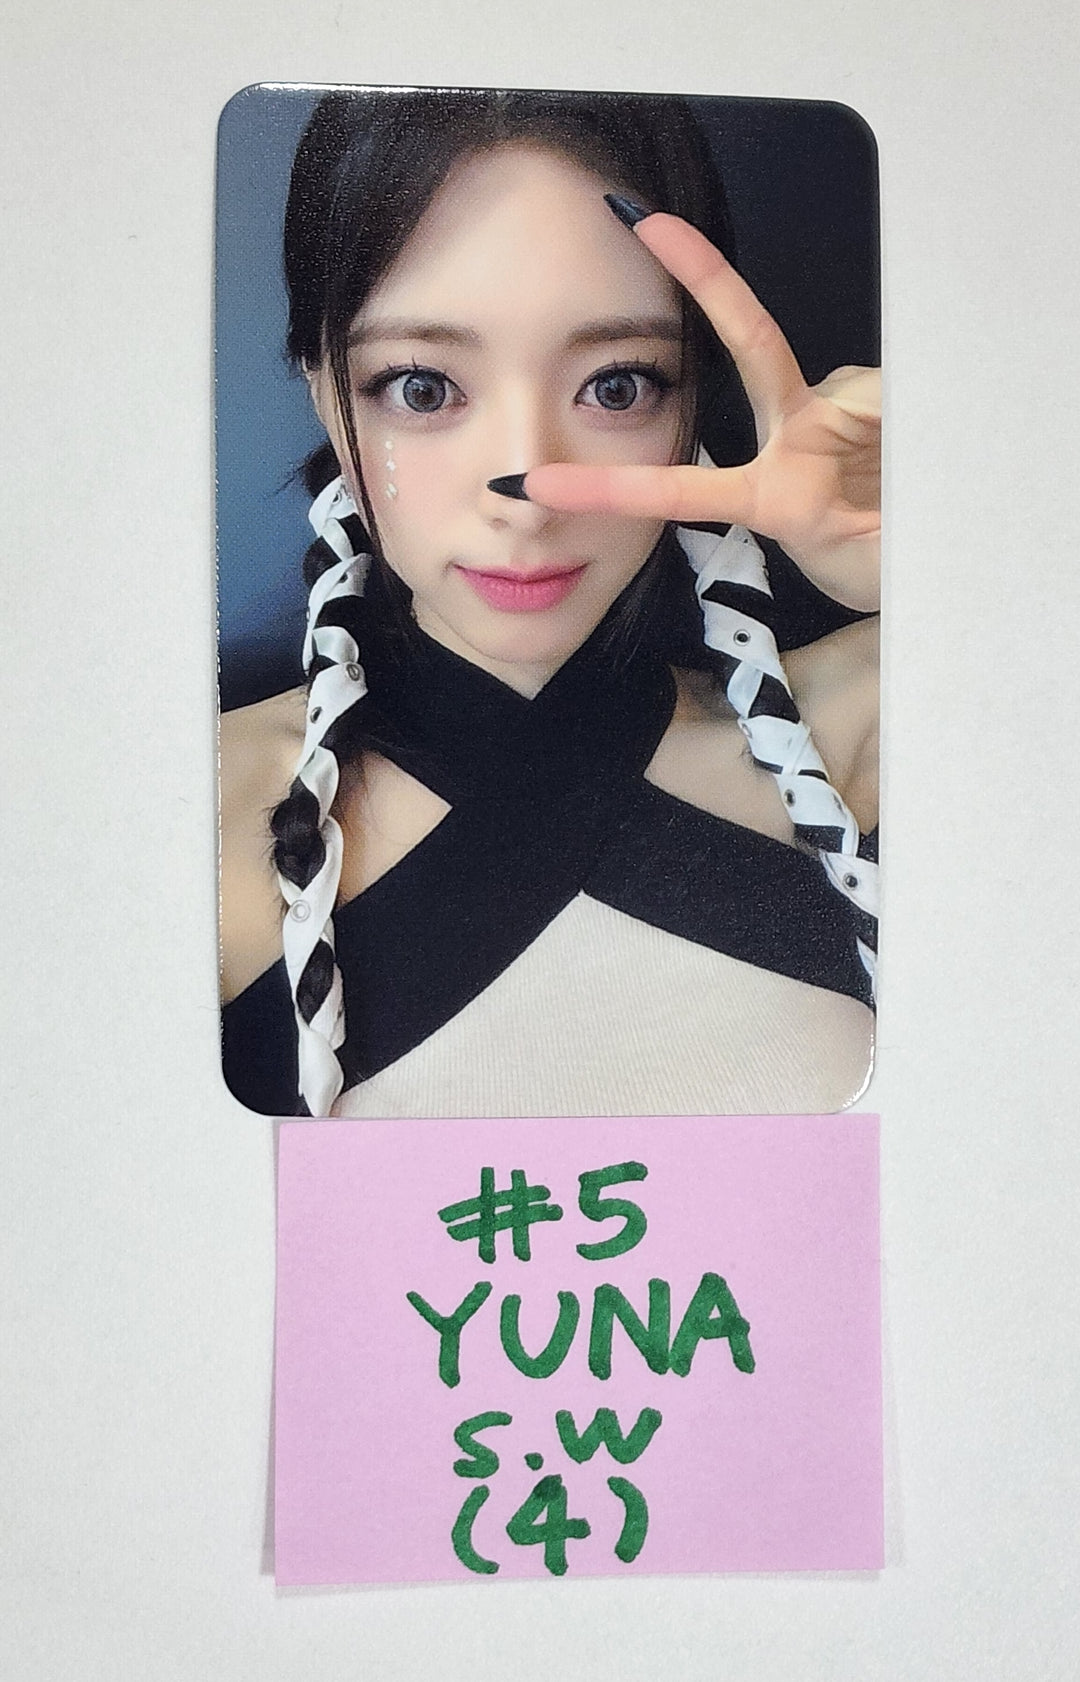 ITZY 'CHESHIRE' - Soundwave Fansign Event Photocard